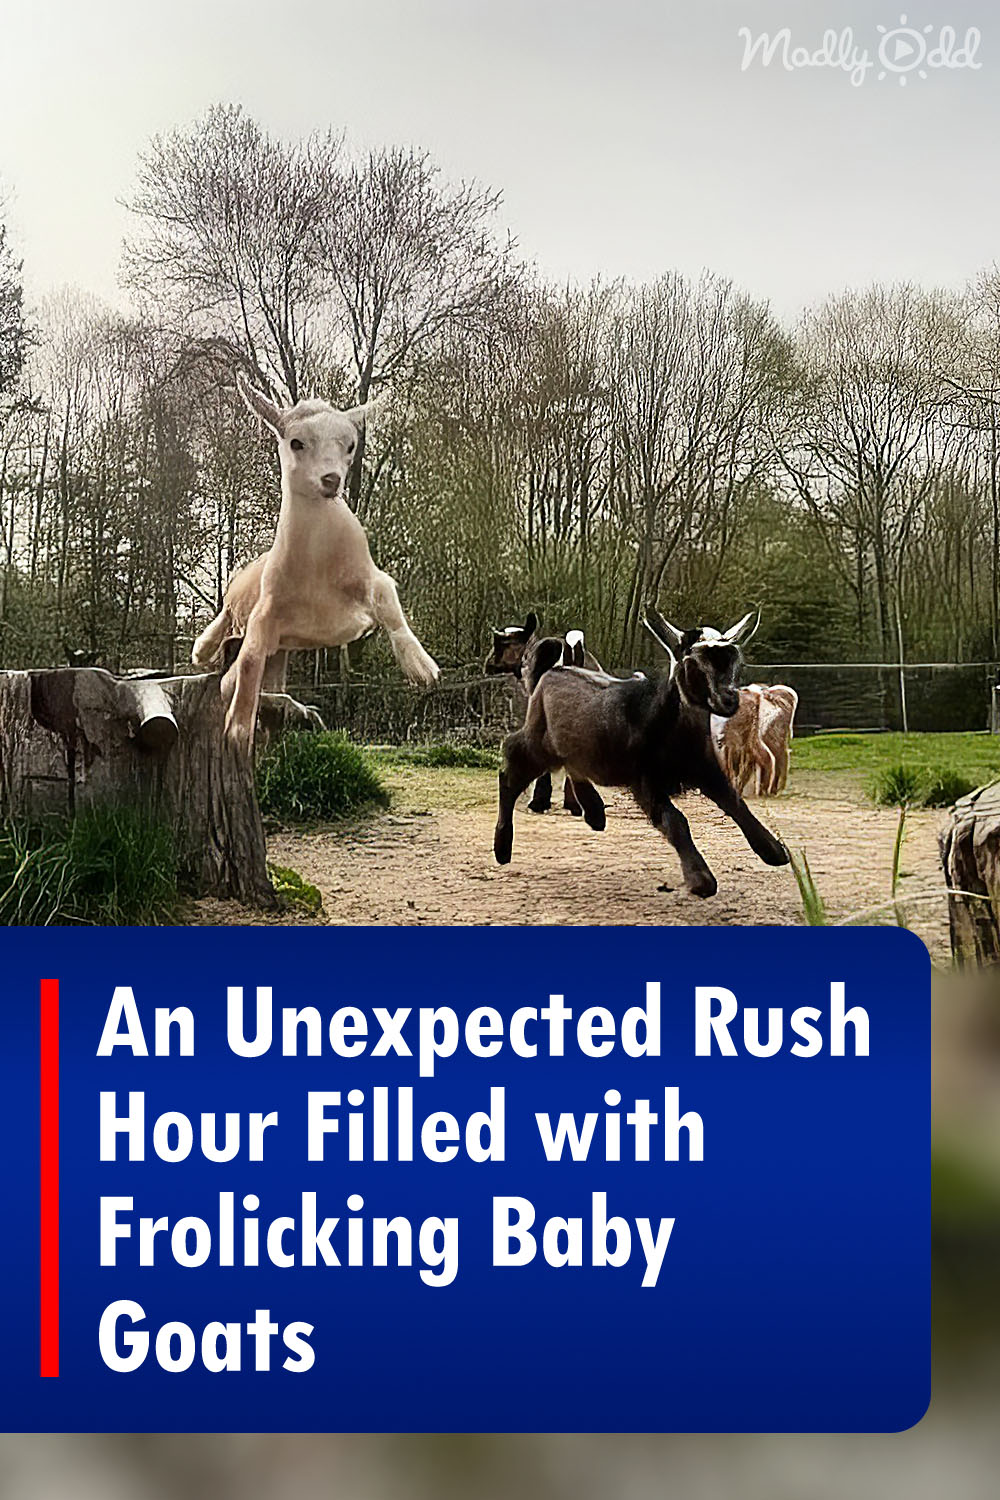 An Unexpected Rush Hour Filled with Frolicking Baby Goats